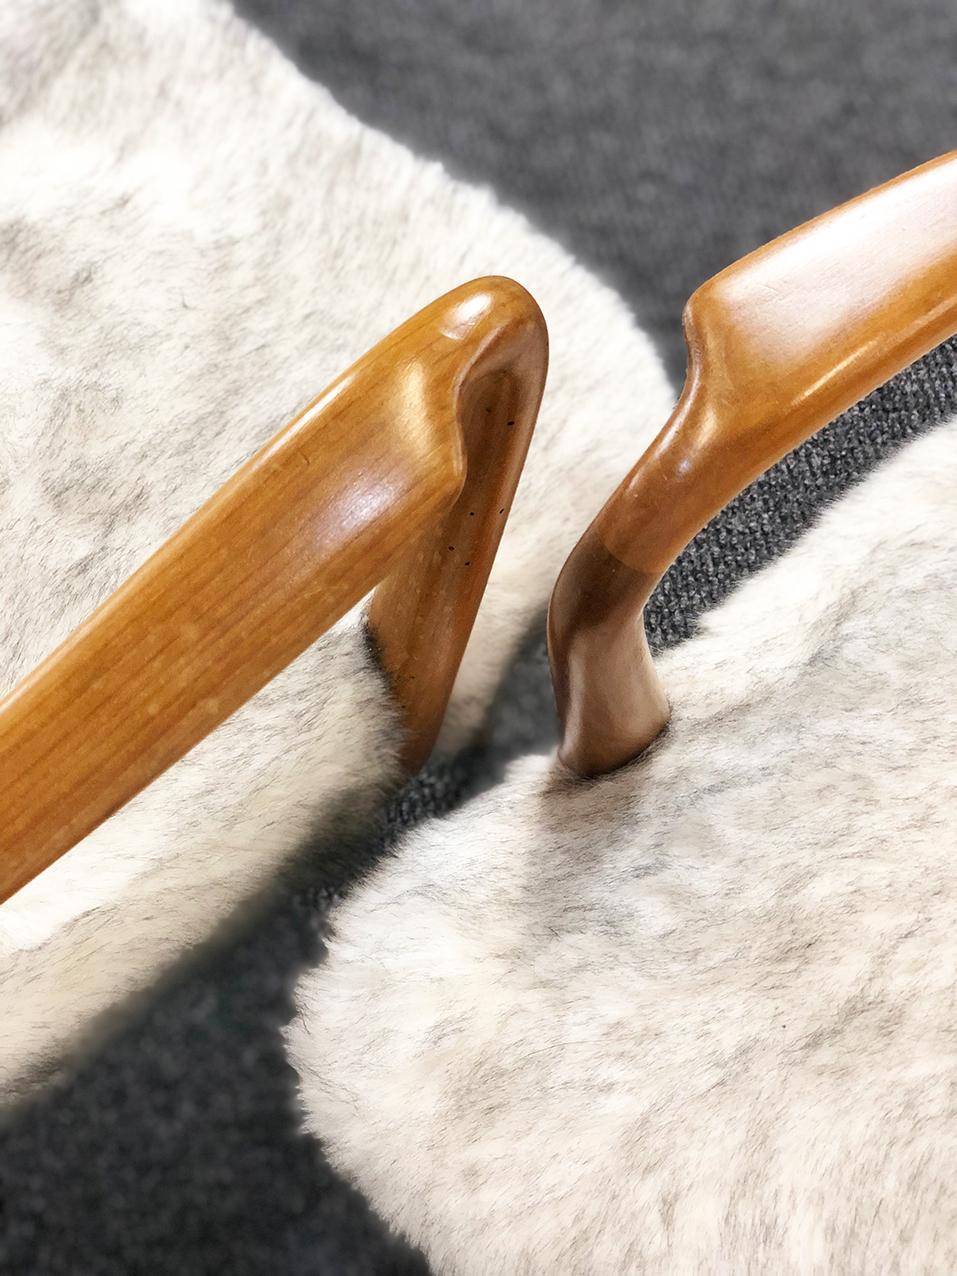 The pair of chairs has a maple wood frame, while its seat is made of synthetic fur. Noteworthy is the backrest made of wood with rods. To make the seat even more comfortable, the armrests are slightly made upwards. Its feet are tapered and conical